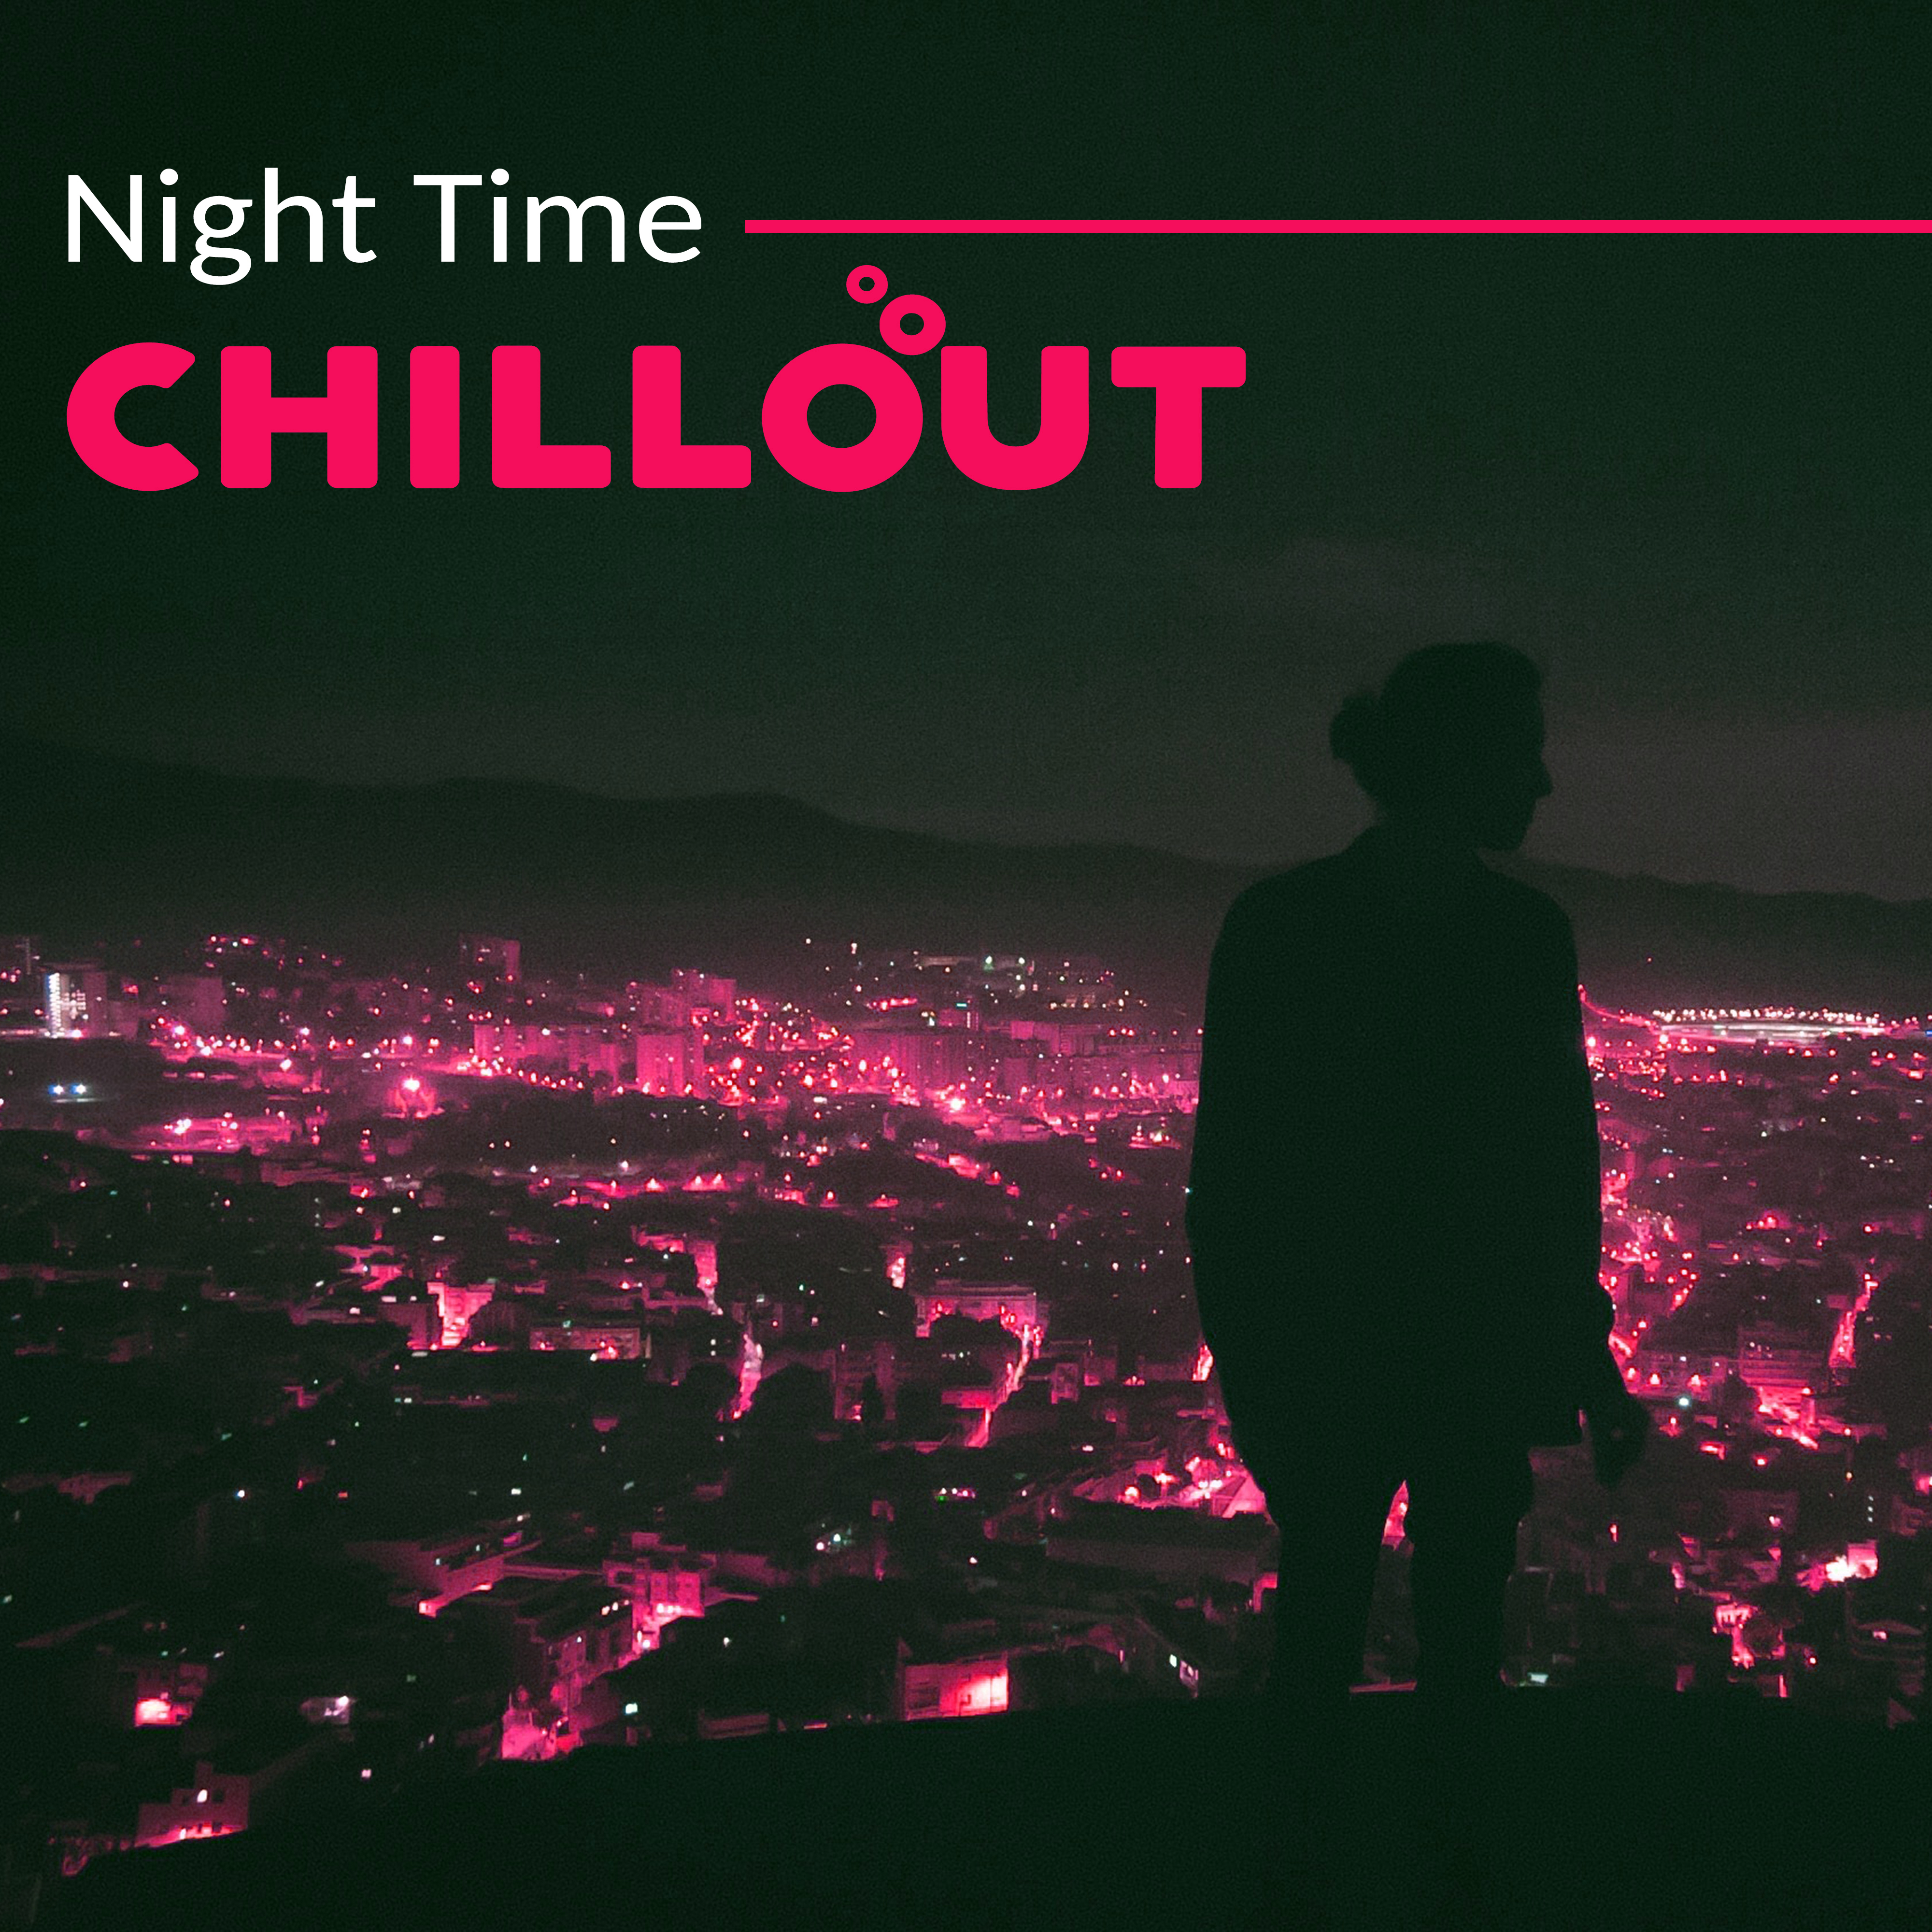 Night Time Chillout  Chill Lounge, Erotic Chill Out Vibrations, Summer Night